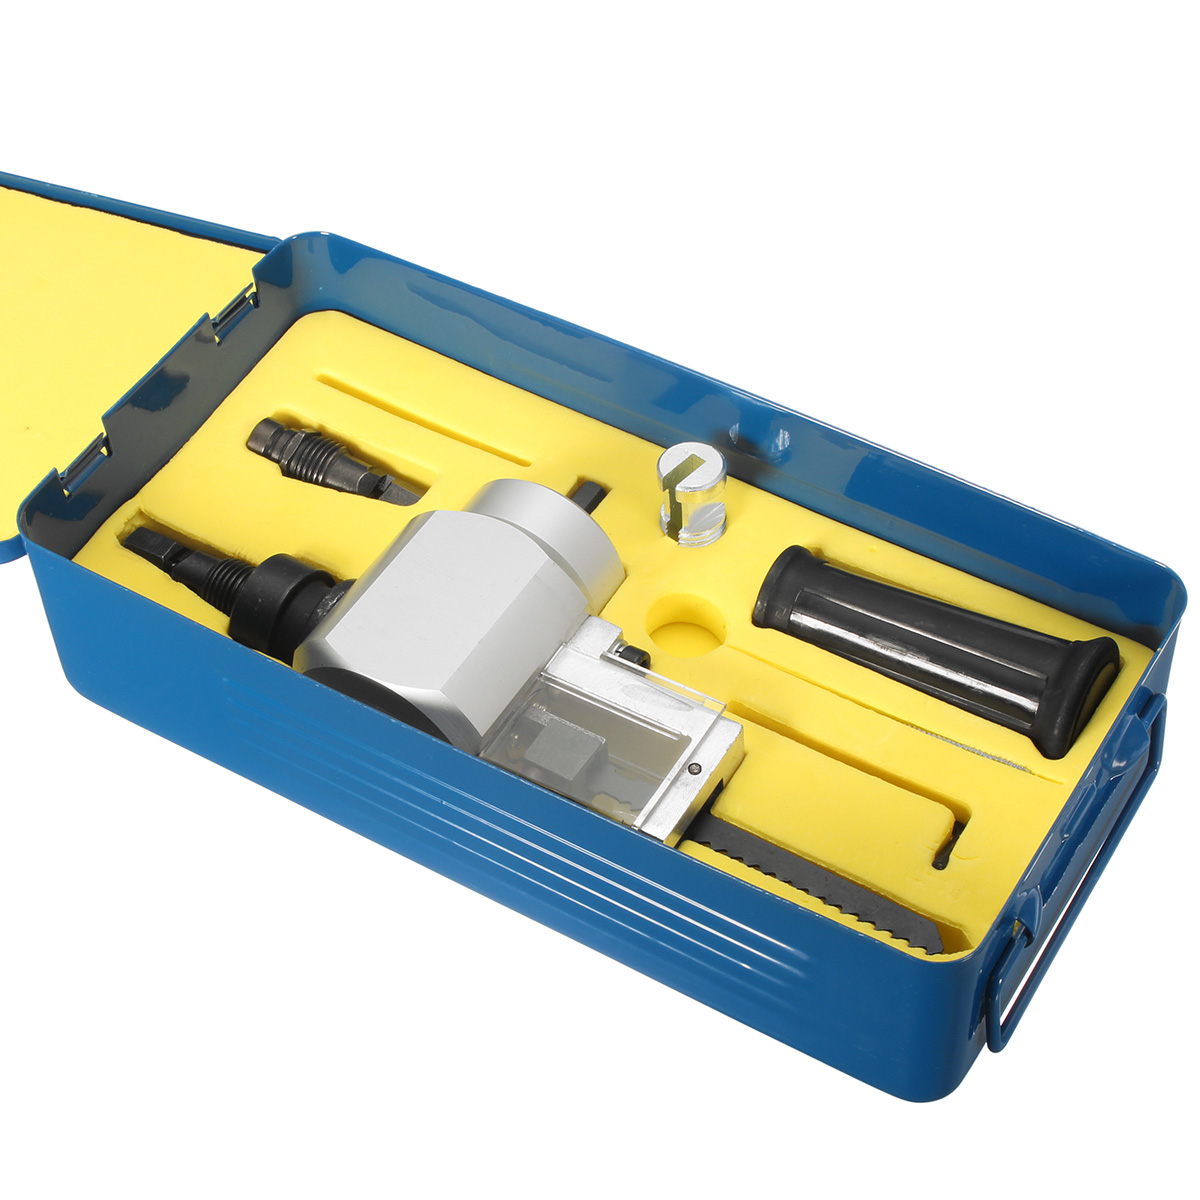 

Double Head Sheet Metal Nibbler Cutter With Metal Box YT-180A Cutting Saw Tool Power Drill Attachment